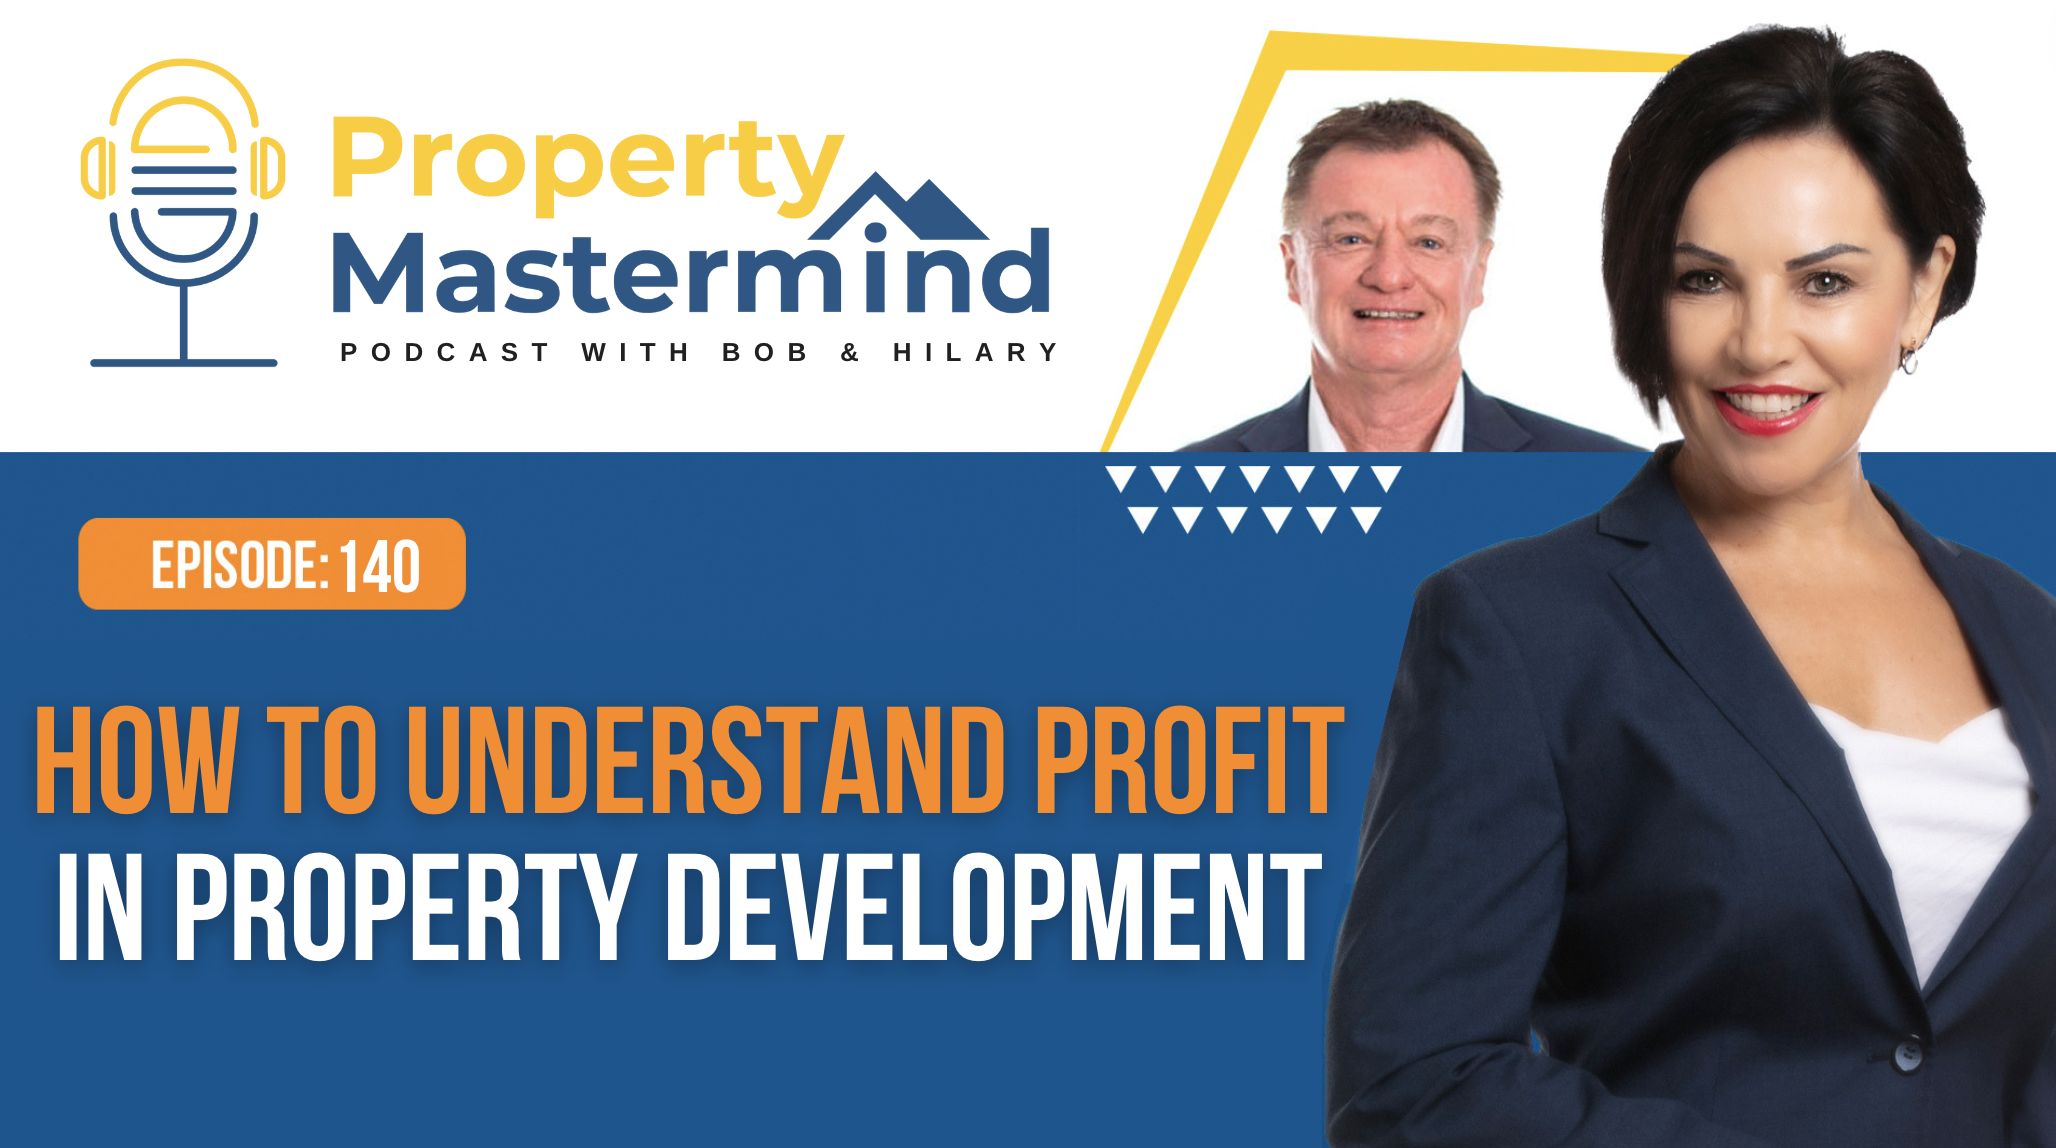 EP 140: How To Understand Profit In Property Development